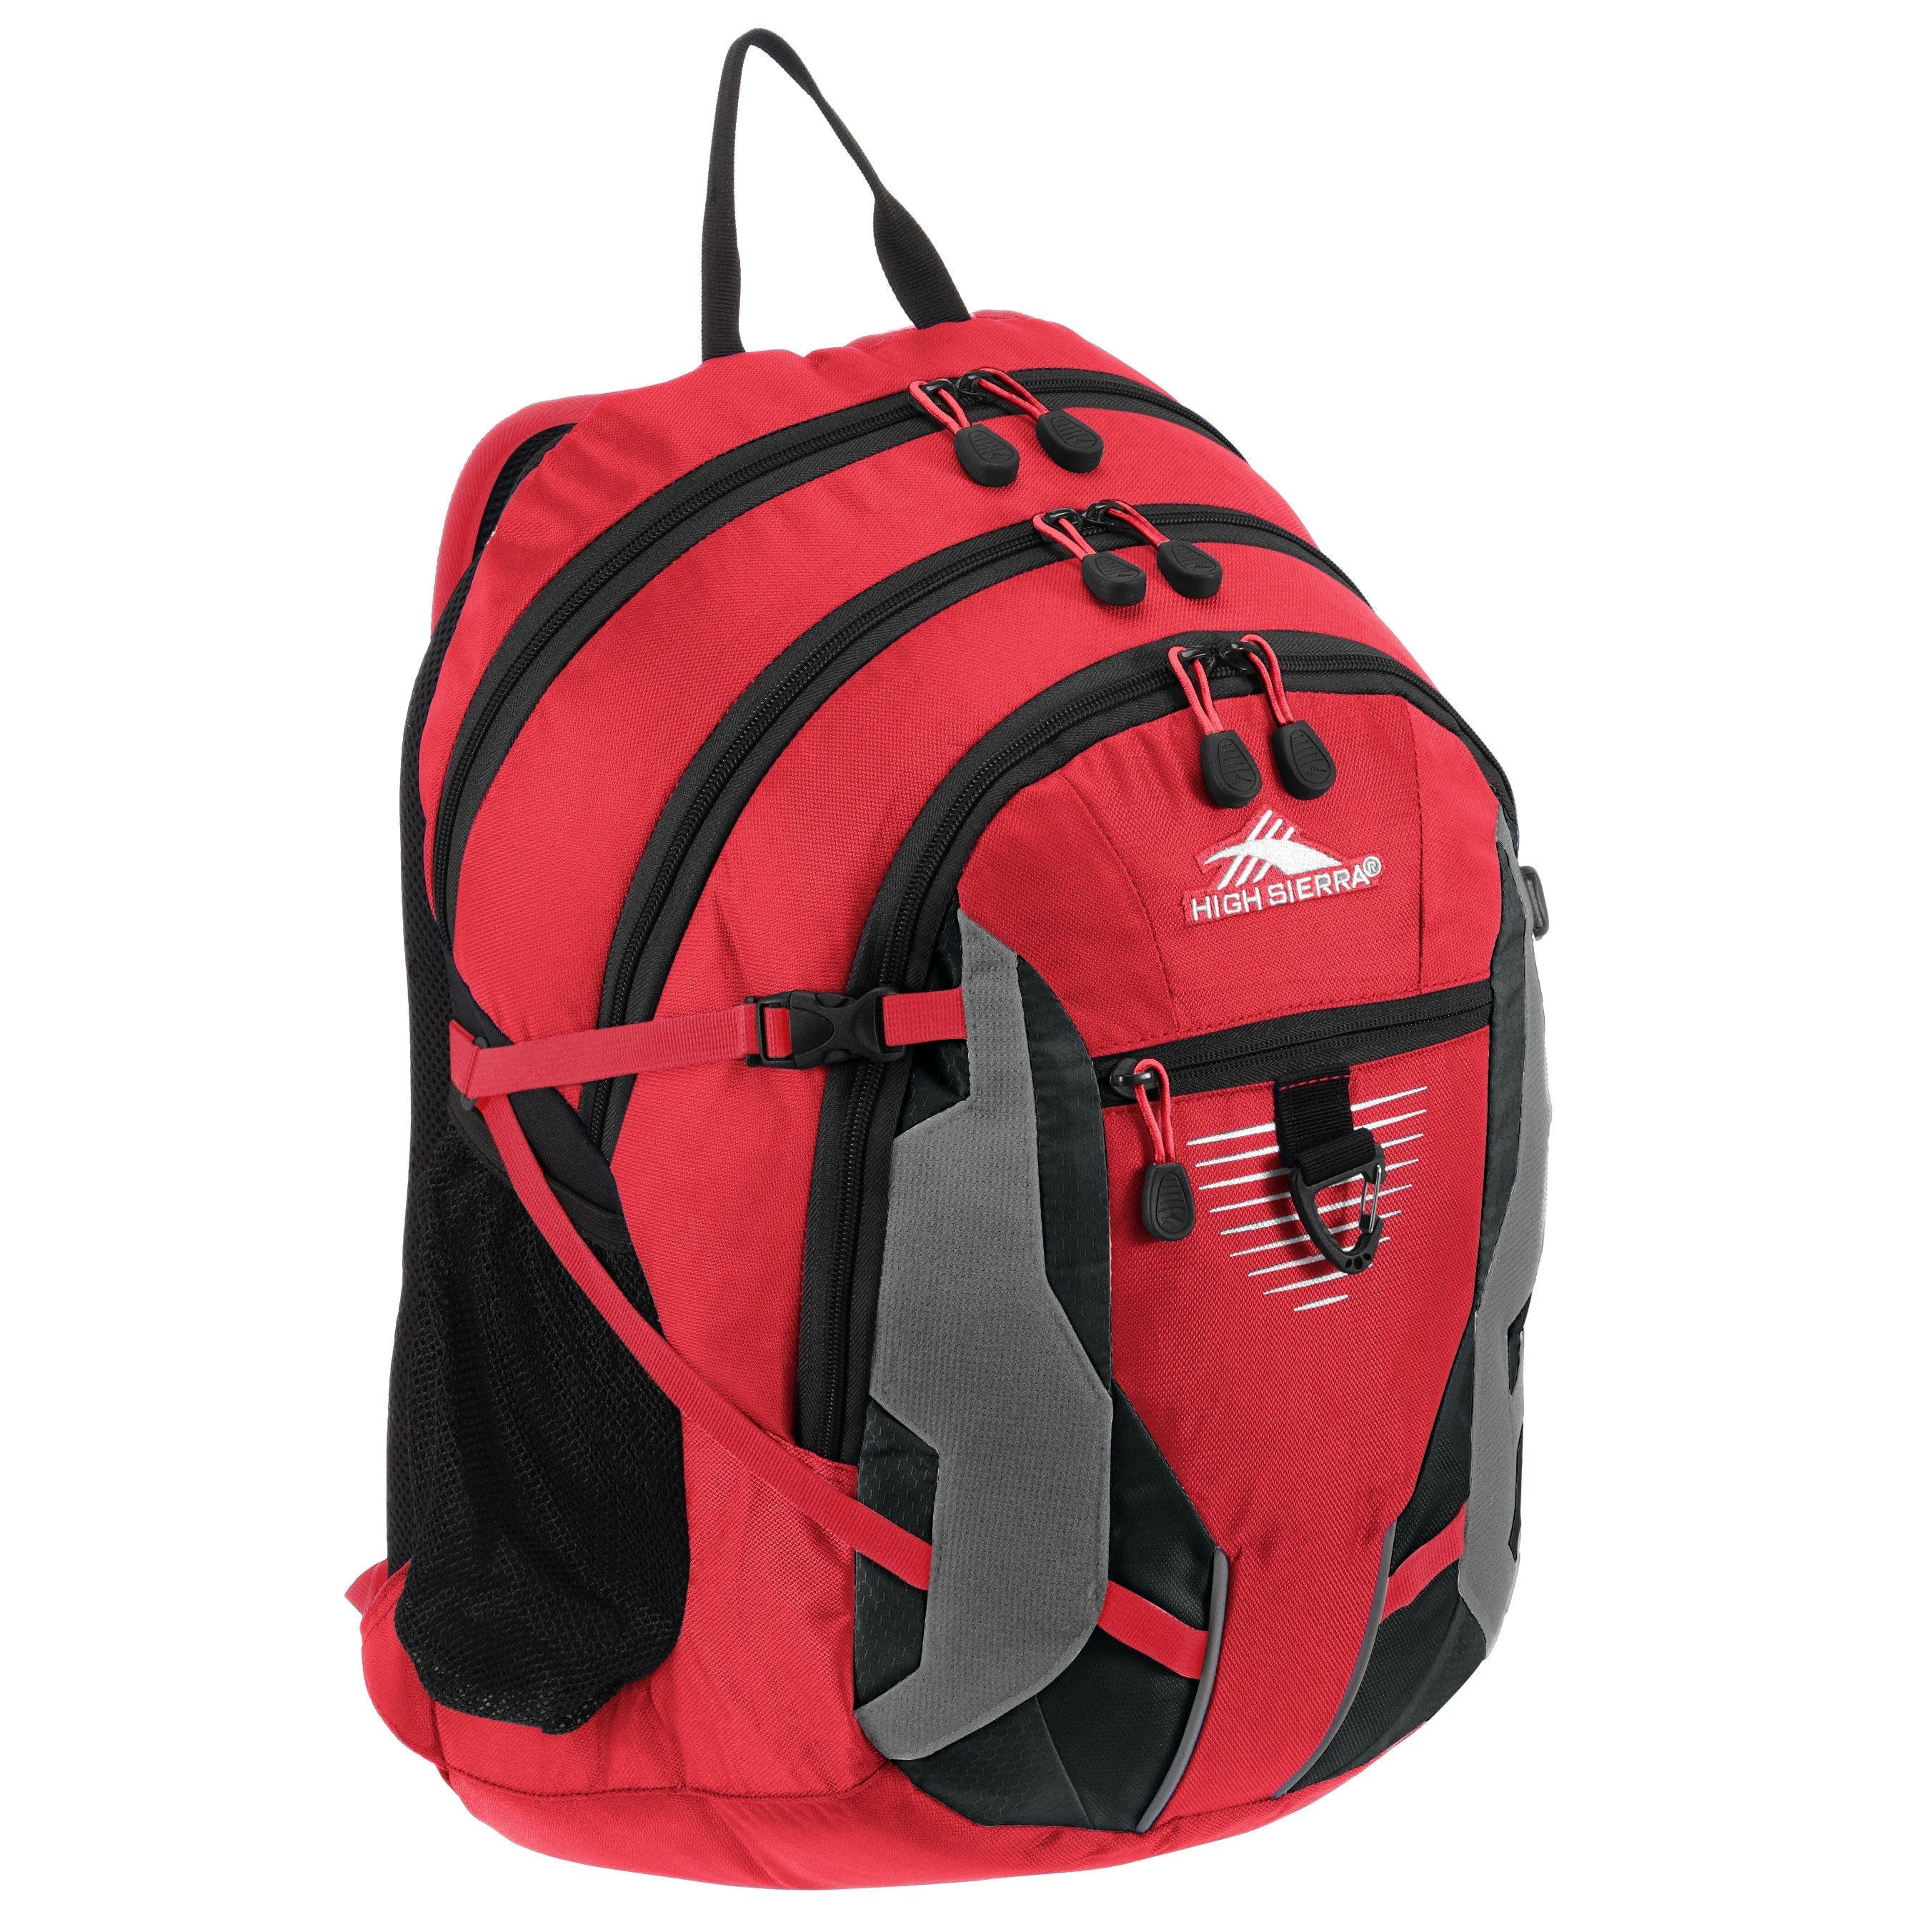 High Sierra School Backpacks backpack with laptop compartment Aggro 49 cm - crimson/black/silver